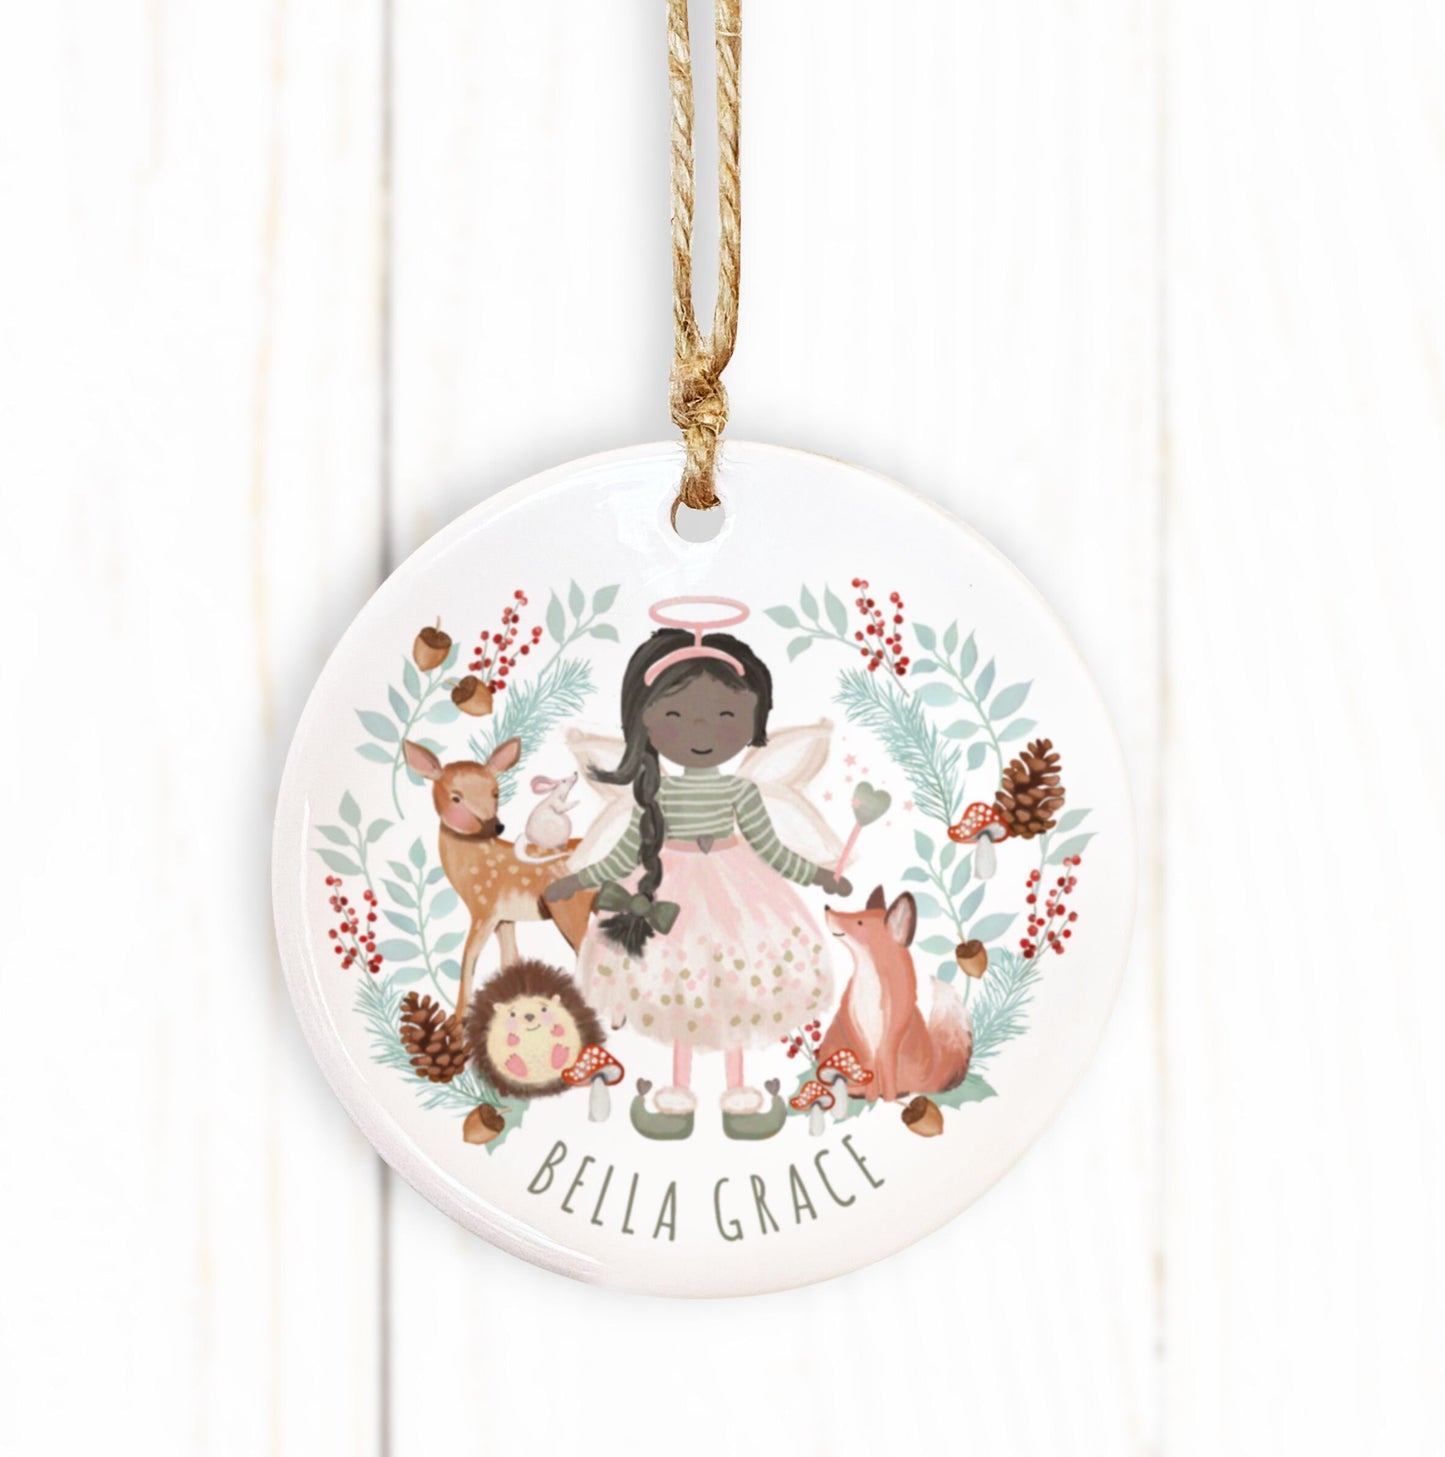 Personalised Woodland Christmas Fairy Bauble. Any skin tone and hair colour Fairy. Personalised Christmas Tree Decoration.